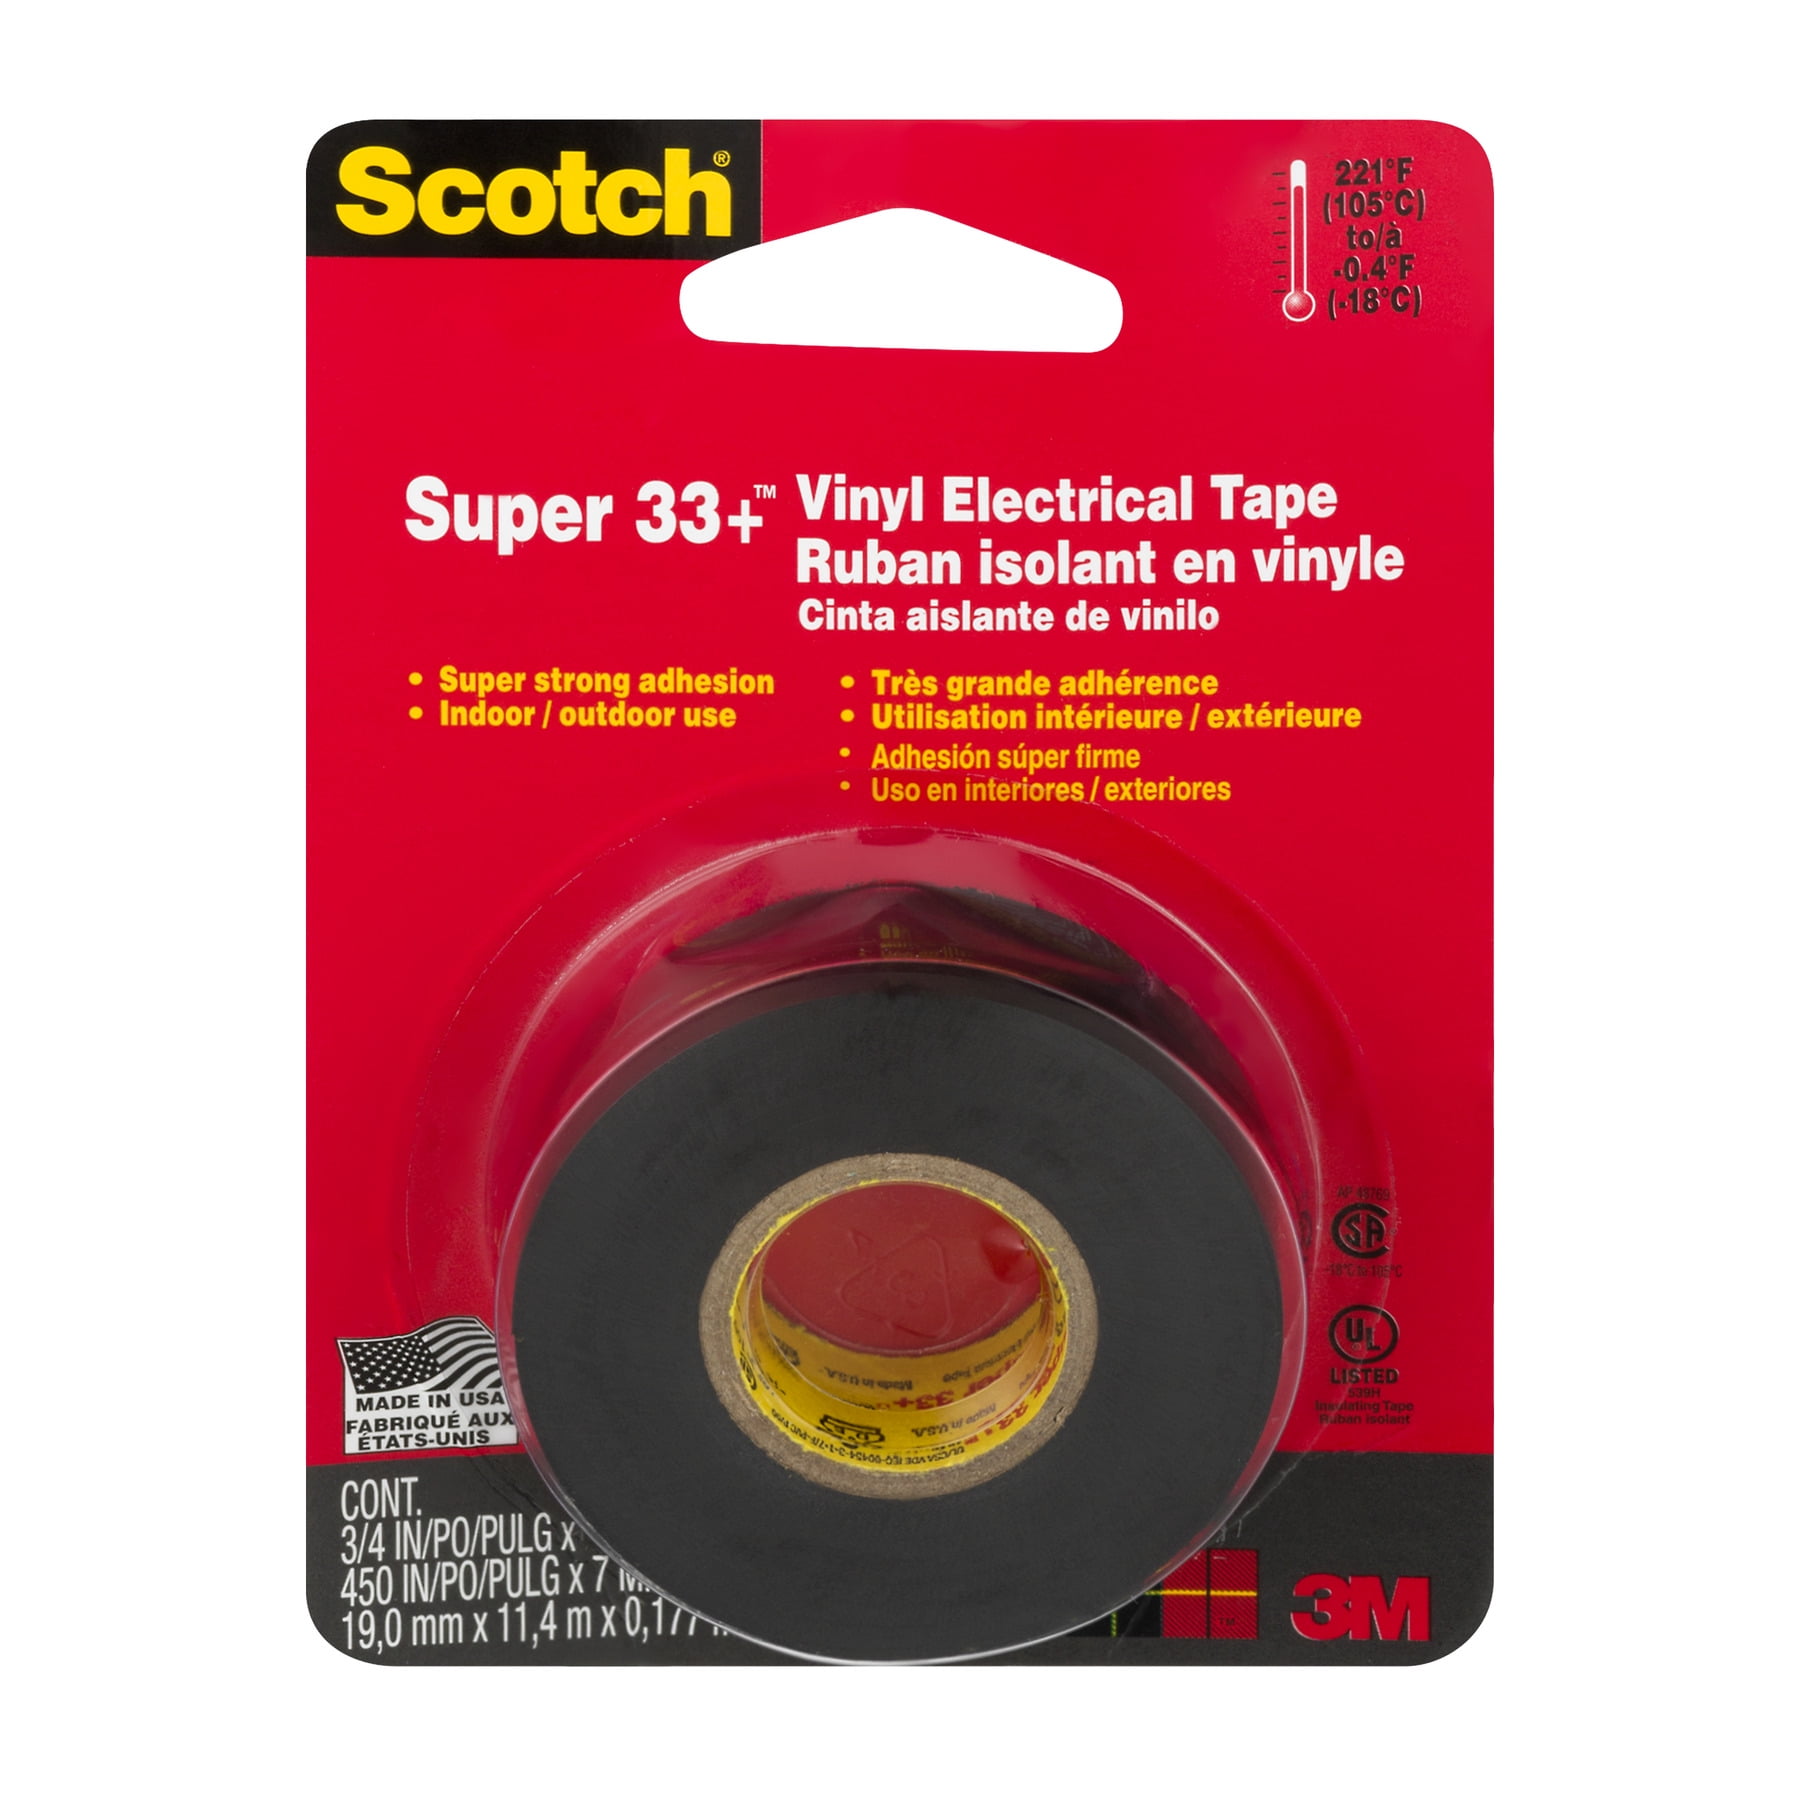 Scotch Vinyl Electrical Tape 3/4 " X 66 ' 18 C Yellow Pack of 5 